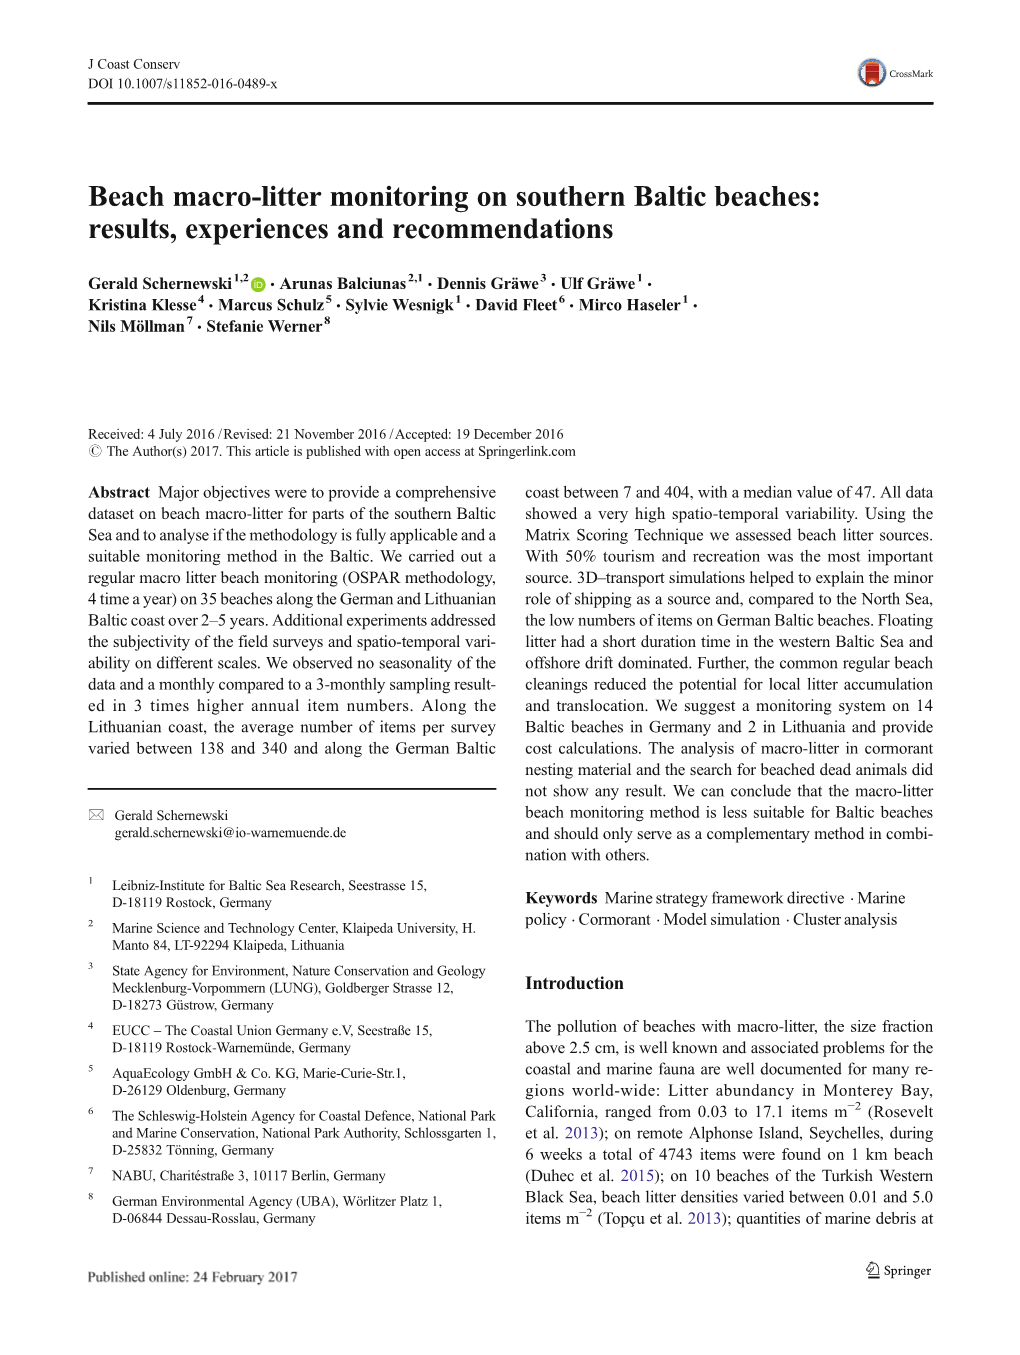 Beach Macro-Litter Monitoring on Southern Baltic Beaches: Results, Experiences and Recommendations